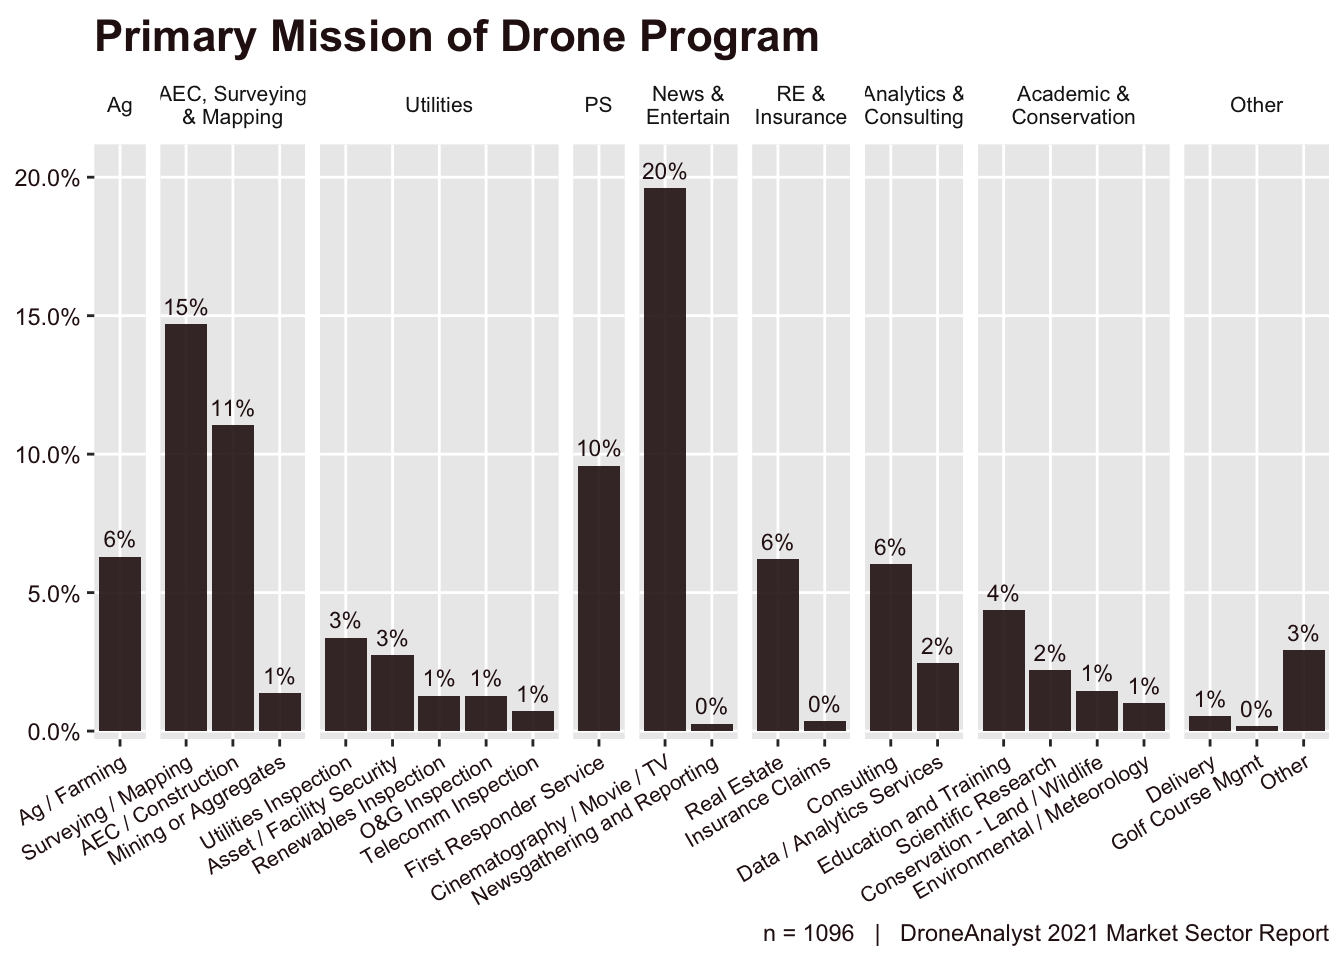 Primary Mission of Drone Program